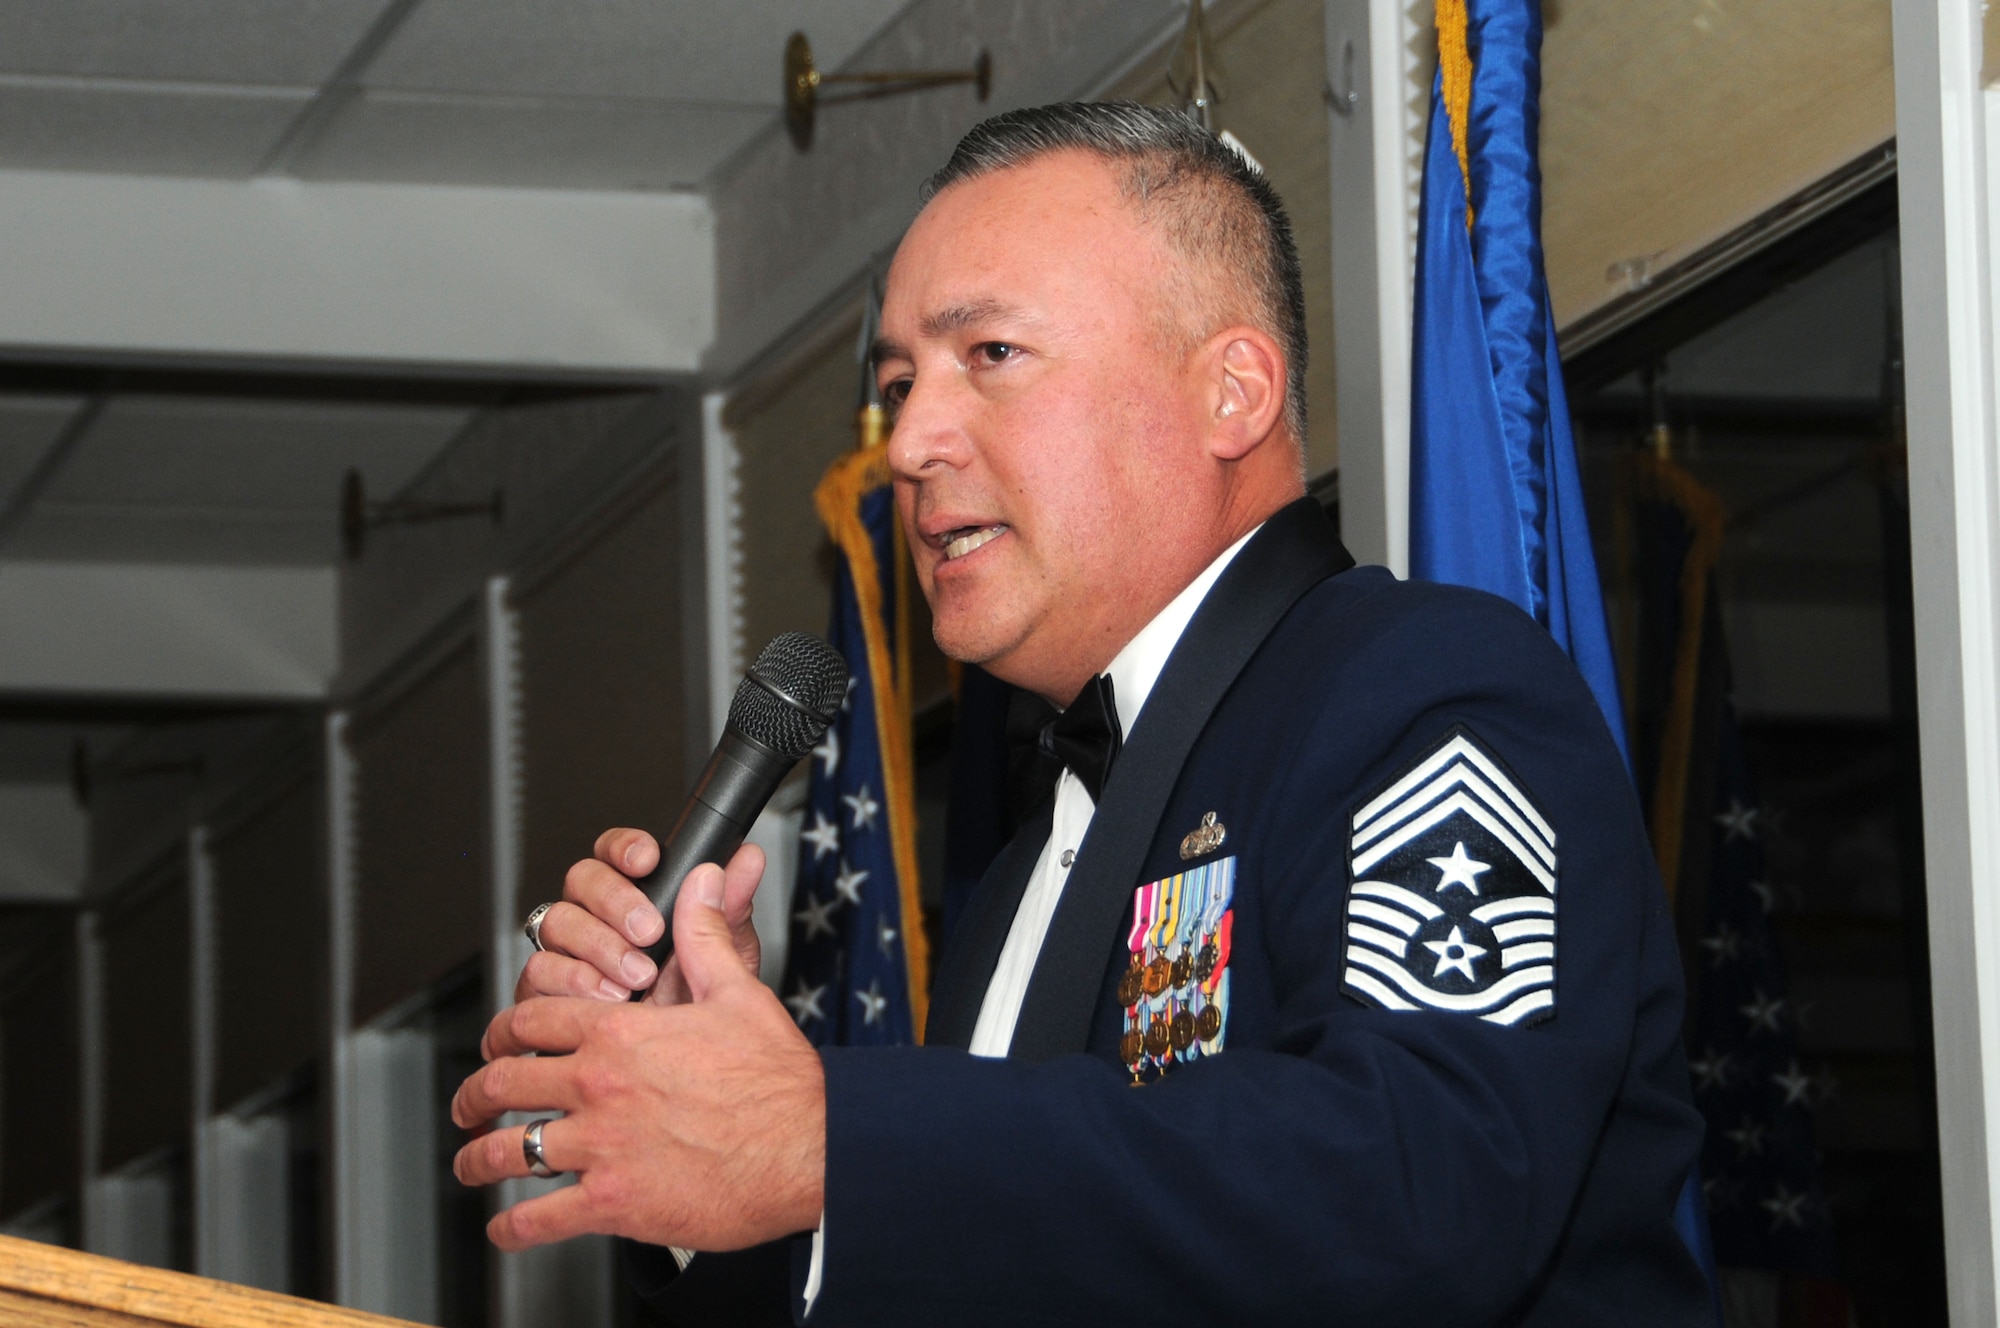 The Senior Enlisted Advisor to the Chief of the National Guard Bureau, Chief Master Sgt. Mitchell O. Brush, served as the guest speaker during the Montana Air National Guard Chief Induction Ceremony held at the Meadowlark Country Club in Great Falls, Mont., Sept. 30, 2016. (U.S. Air National Guard photo by Senior Master Sgt. Eric Peterson)